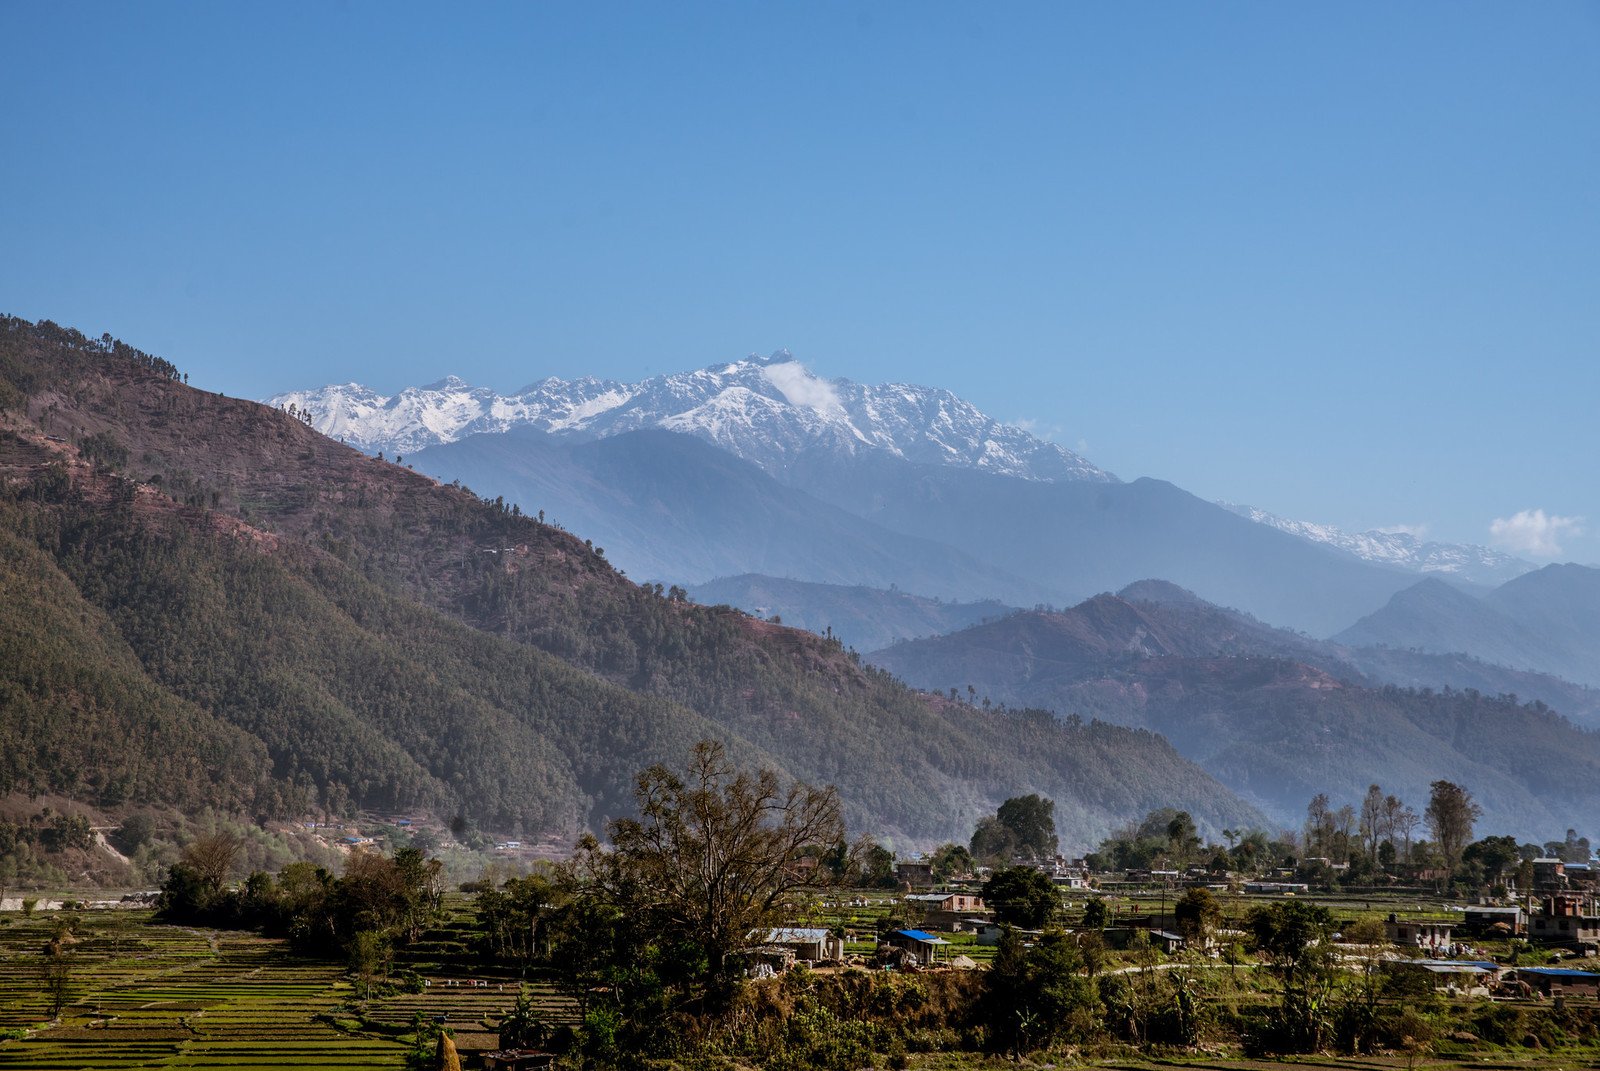 Nepal possesses eight out of ten of the highest peaks in the world. Despite the beauty of these snow-capped mountains, climate change poses a significant threat to Nepalese communities as it can lead to outburst floods from glacial lakes. (Photo: Aurélie Marrier d'Unienville / Oxfam)